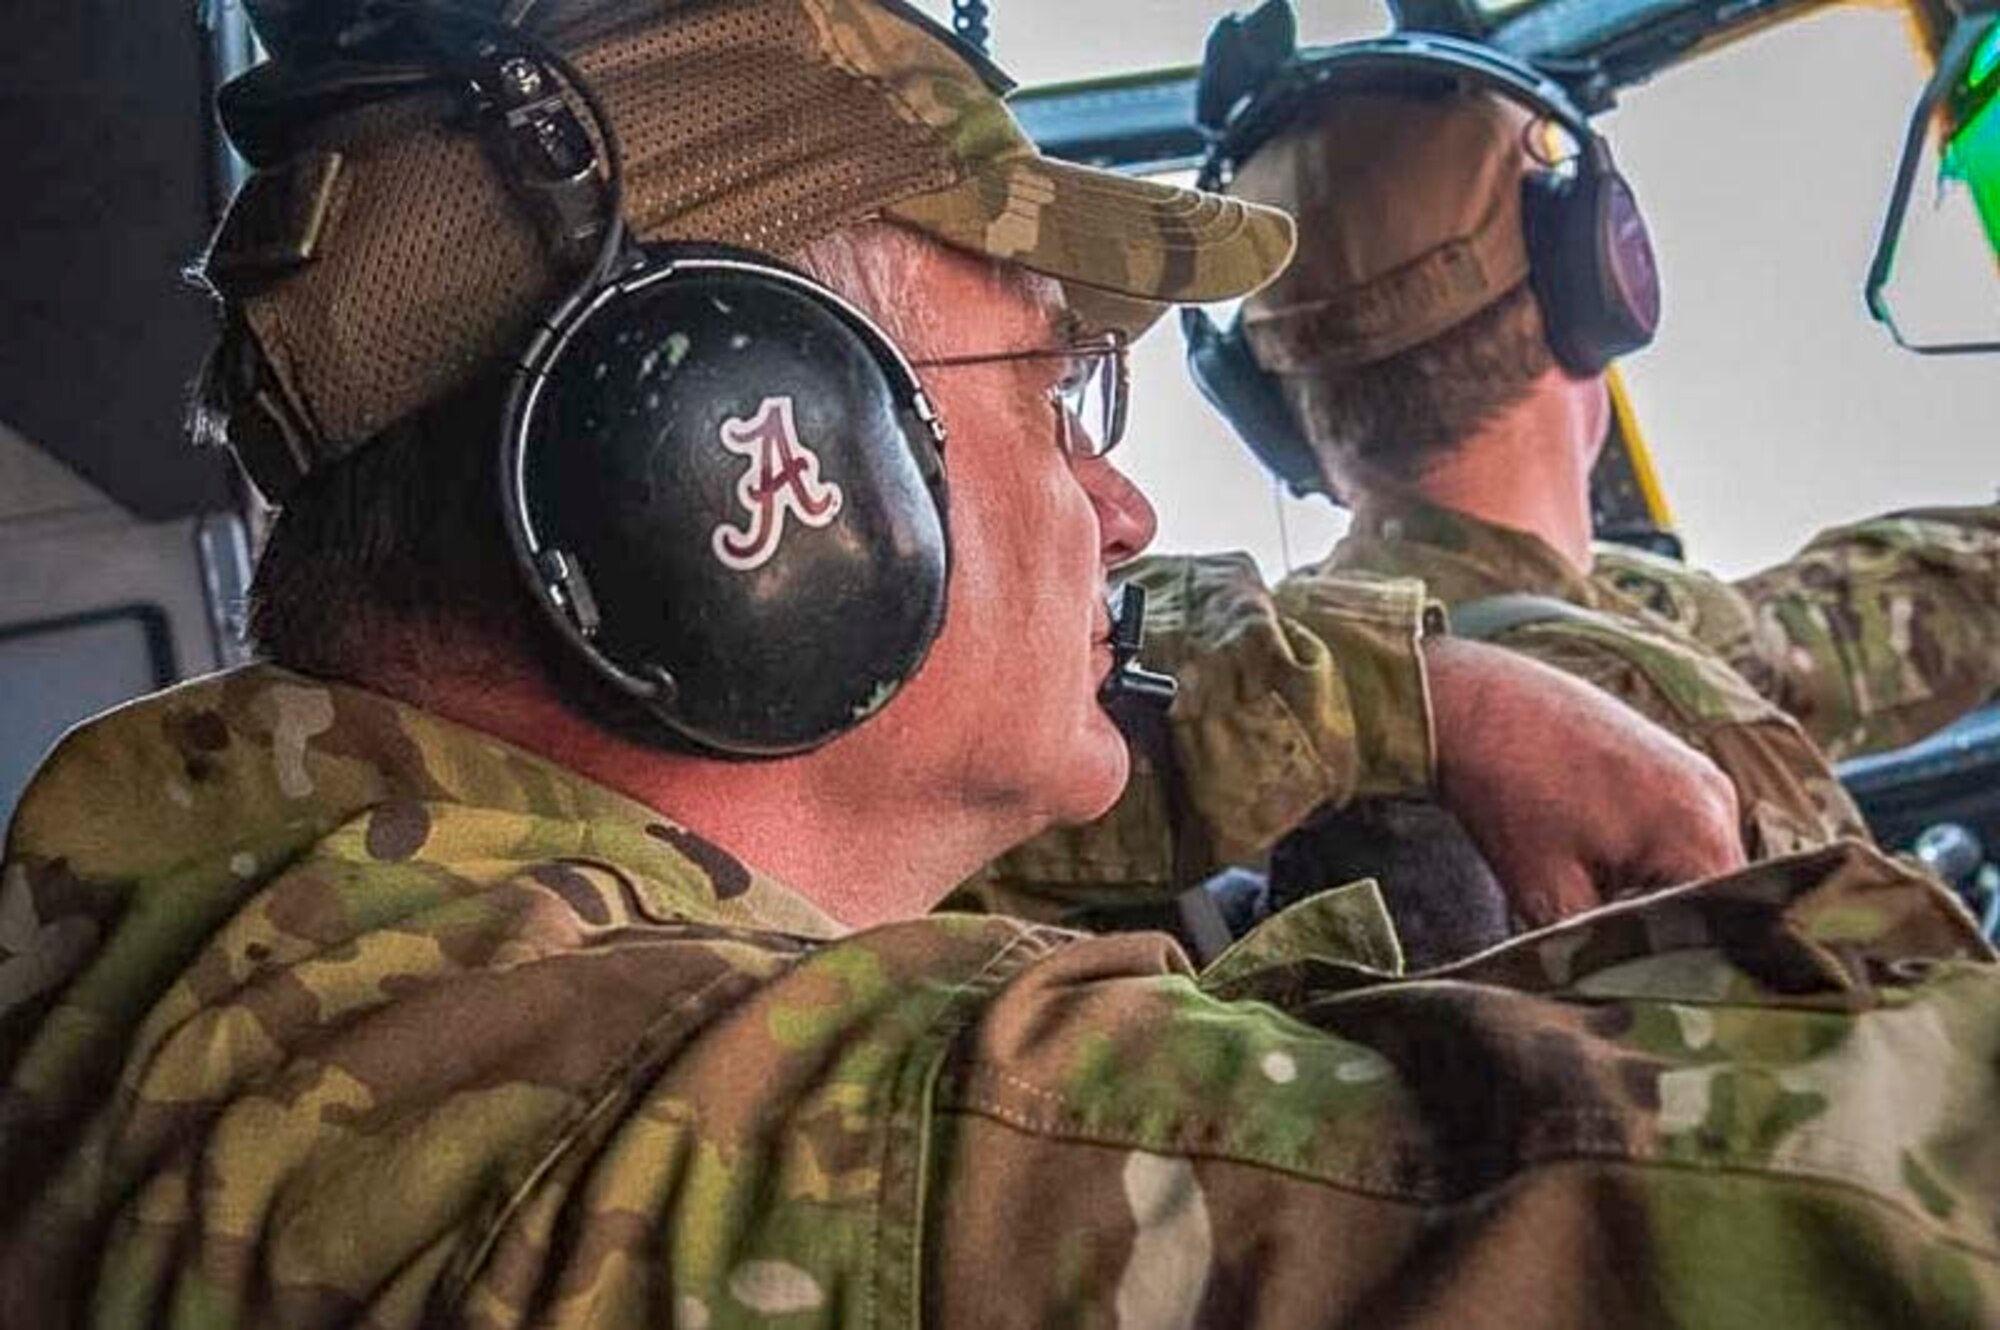 Air Force Reserve Chief Master Sgt. Donald Tarrance sits in the jump seat of a C-130J Hercules aircraft behind the pilots. Tarrance has served for over 40 years and has over 4,500 flight hours as a loadmaster. (Courtesy photo)